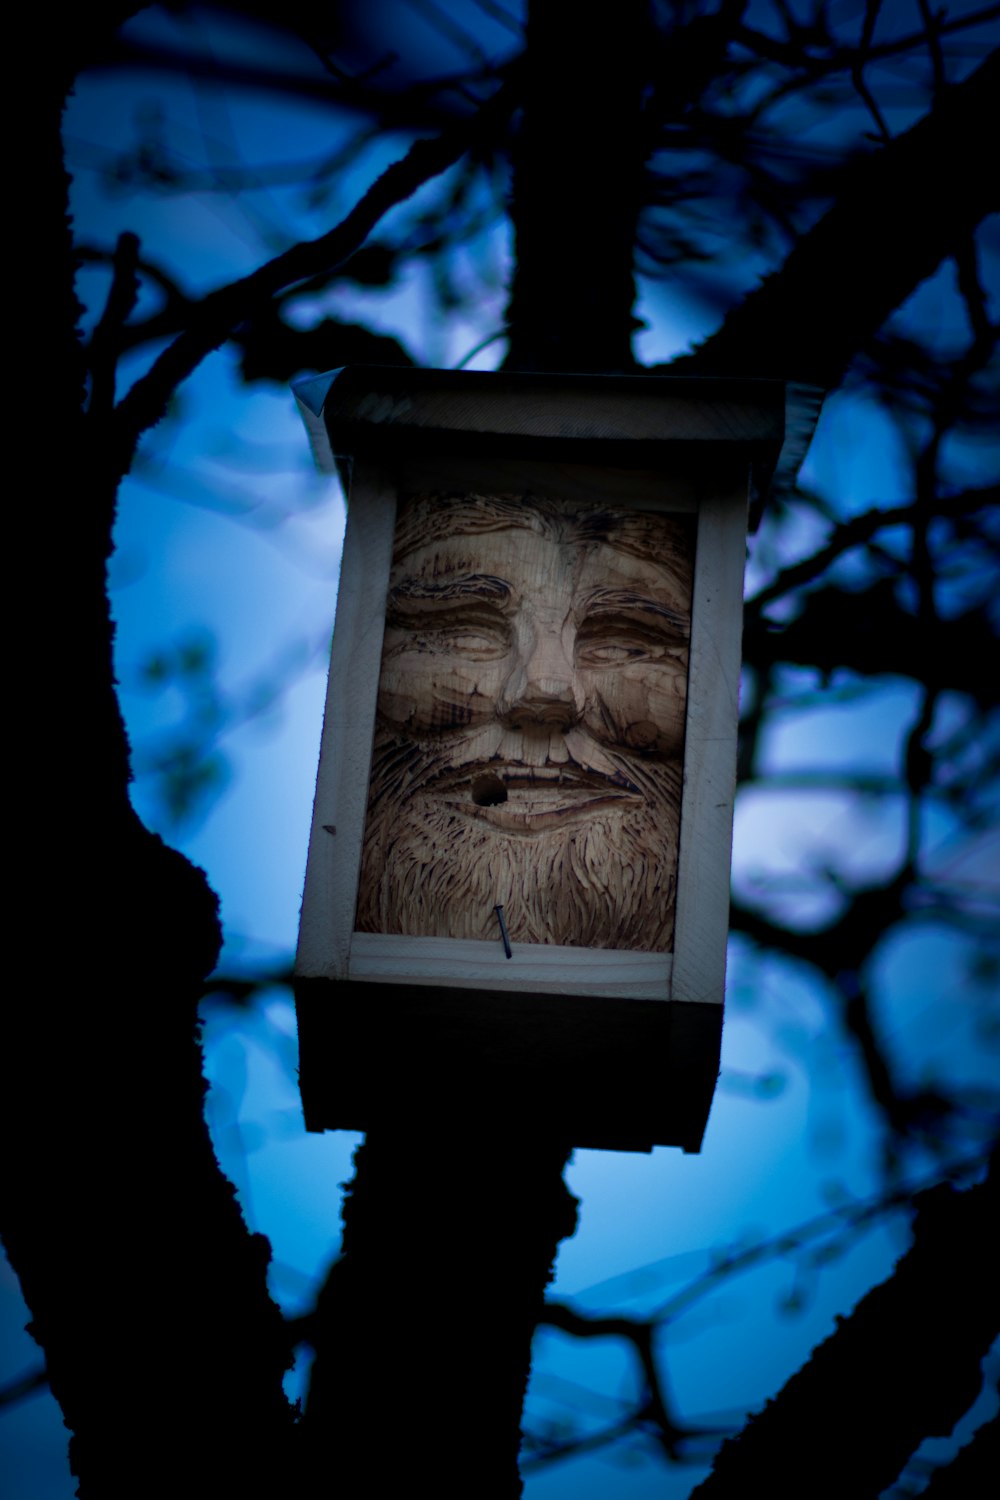 a picture of a bearded man hanging from a tree